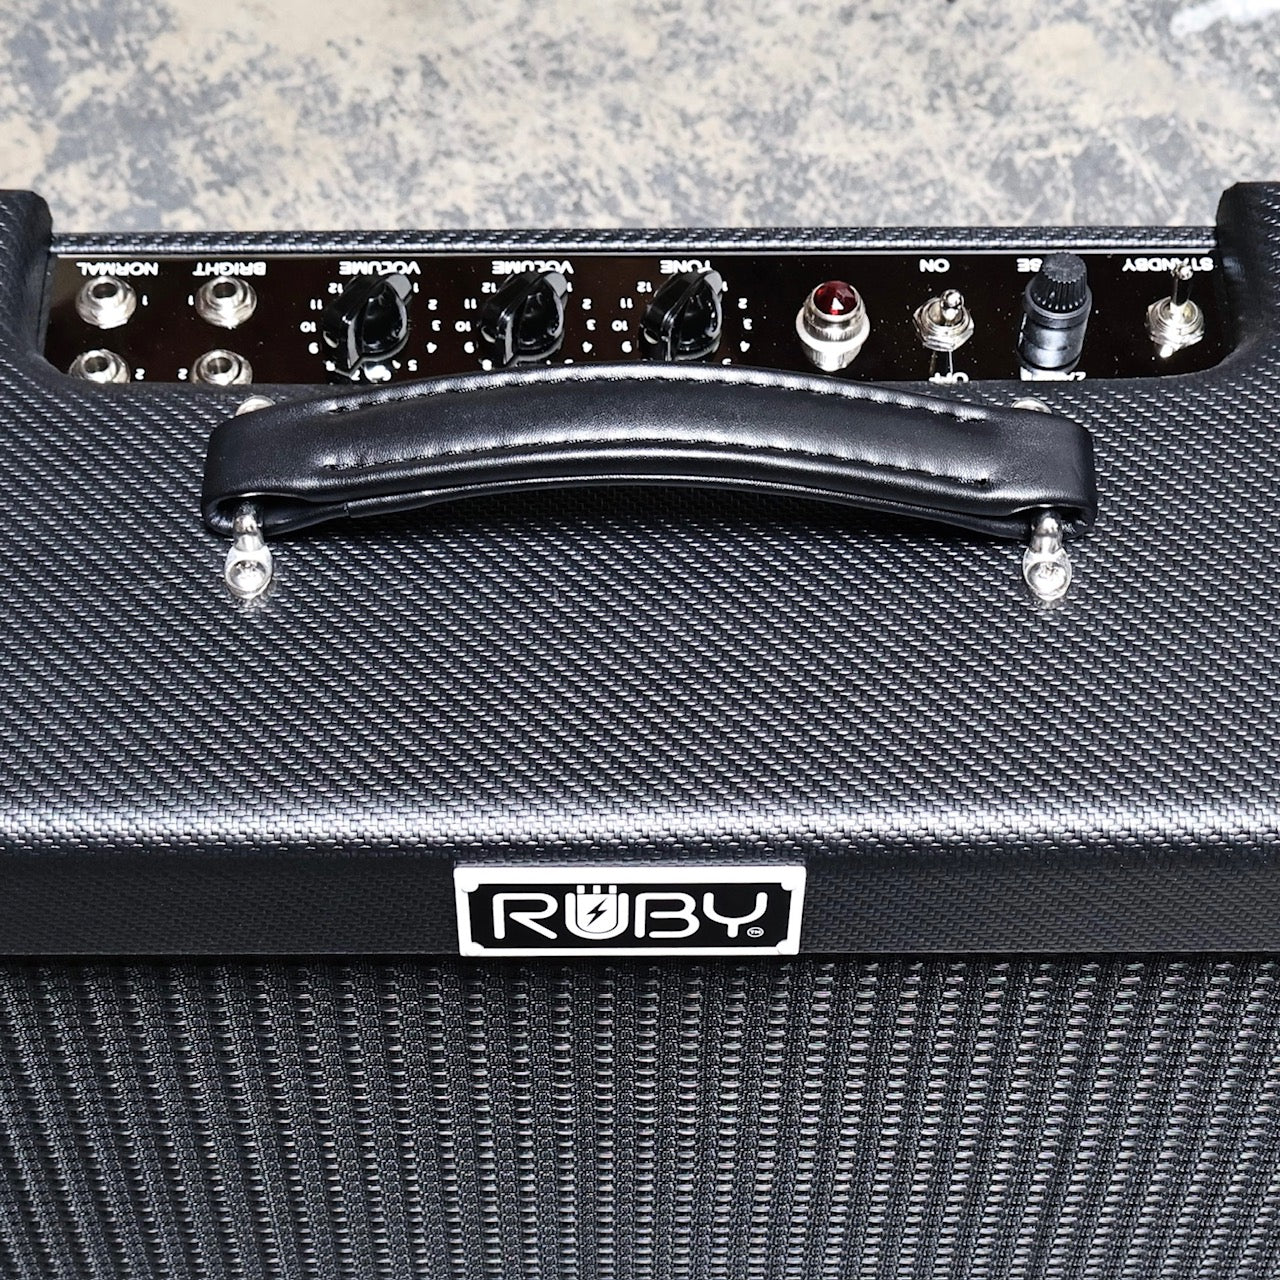 RUBY Amps